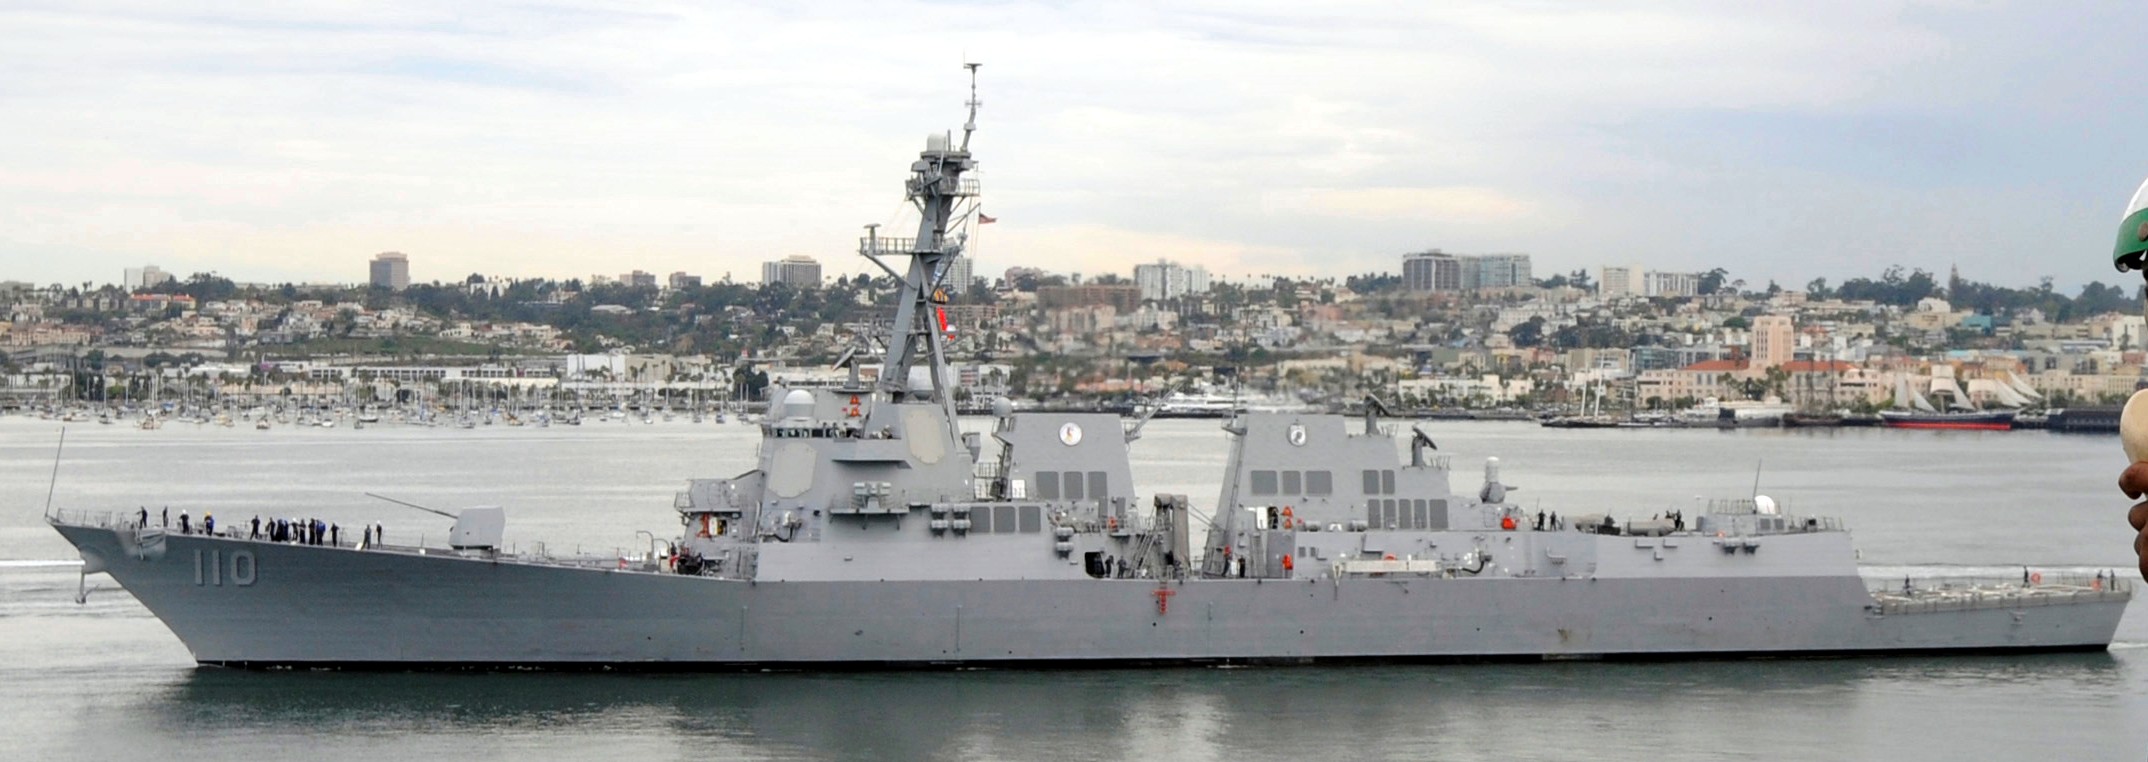 ddg-110 uss william p. lawrence arleigh burke class guided missile destroyer aegis us navy 41p